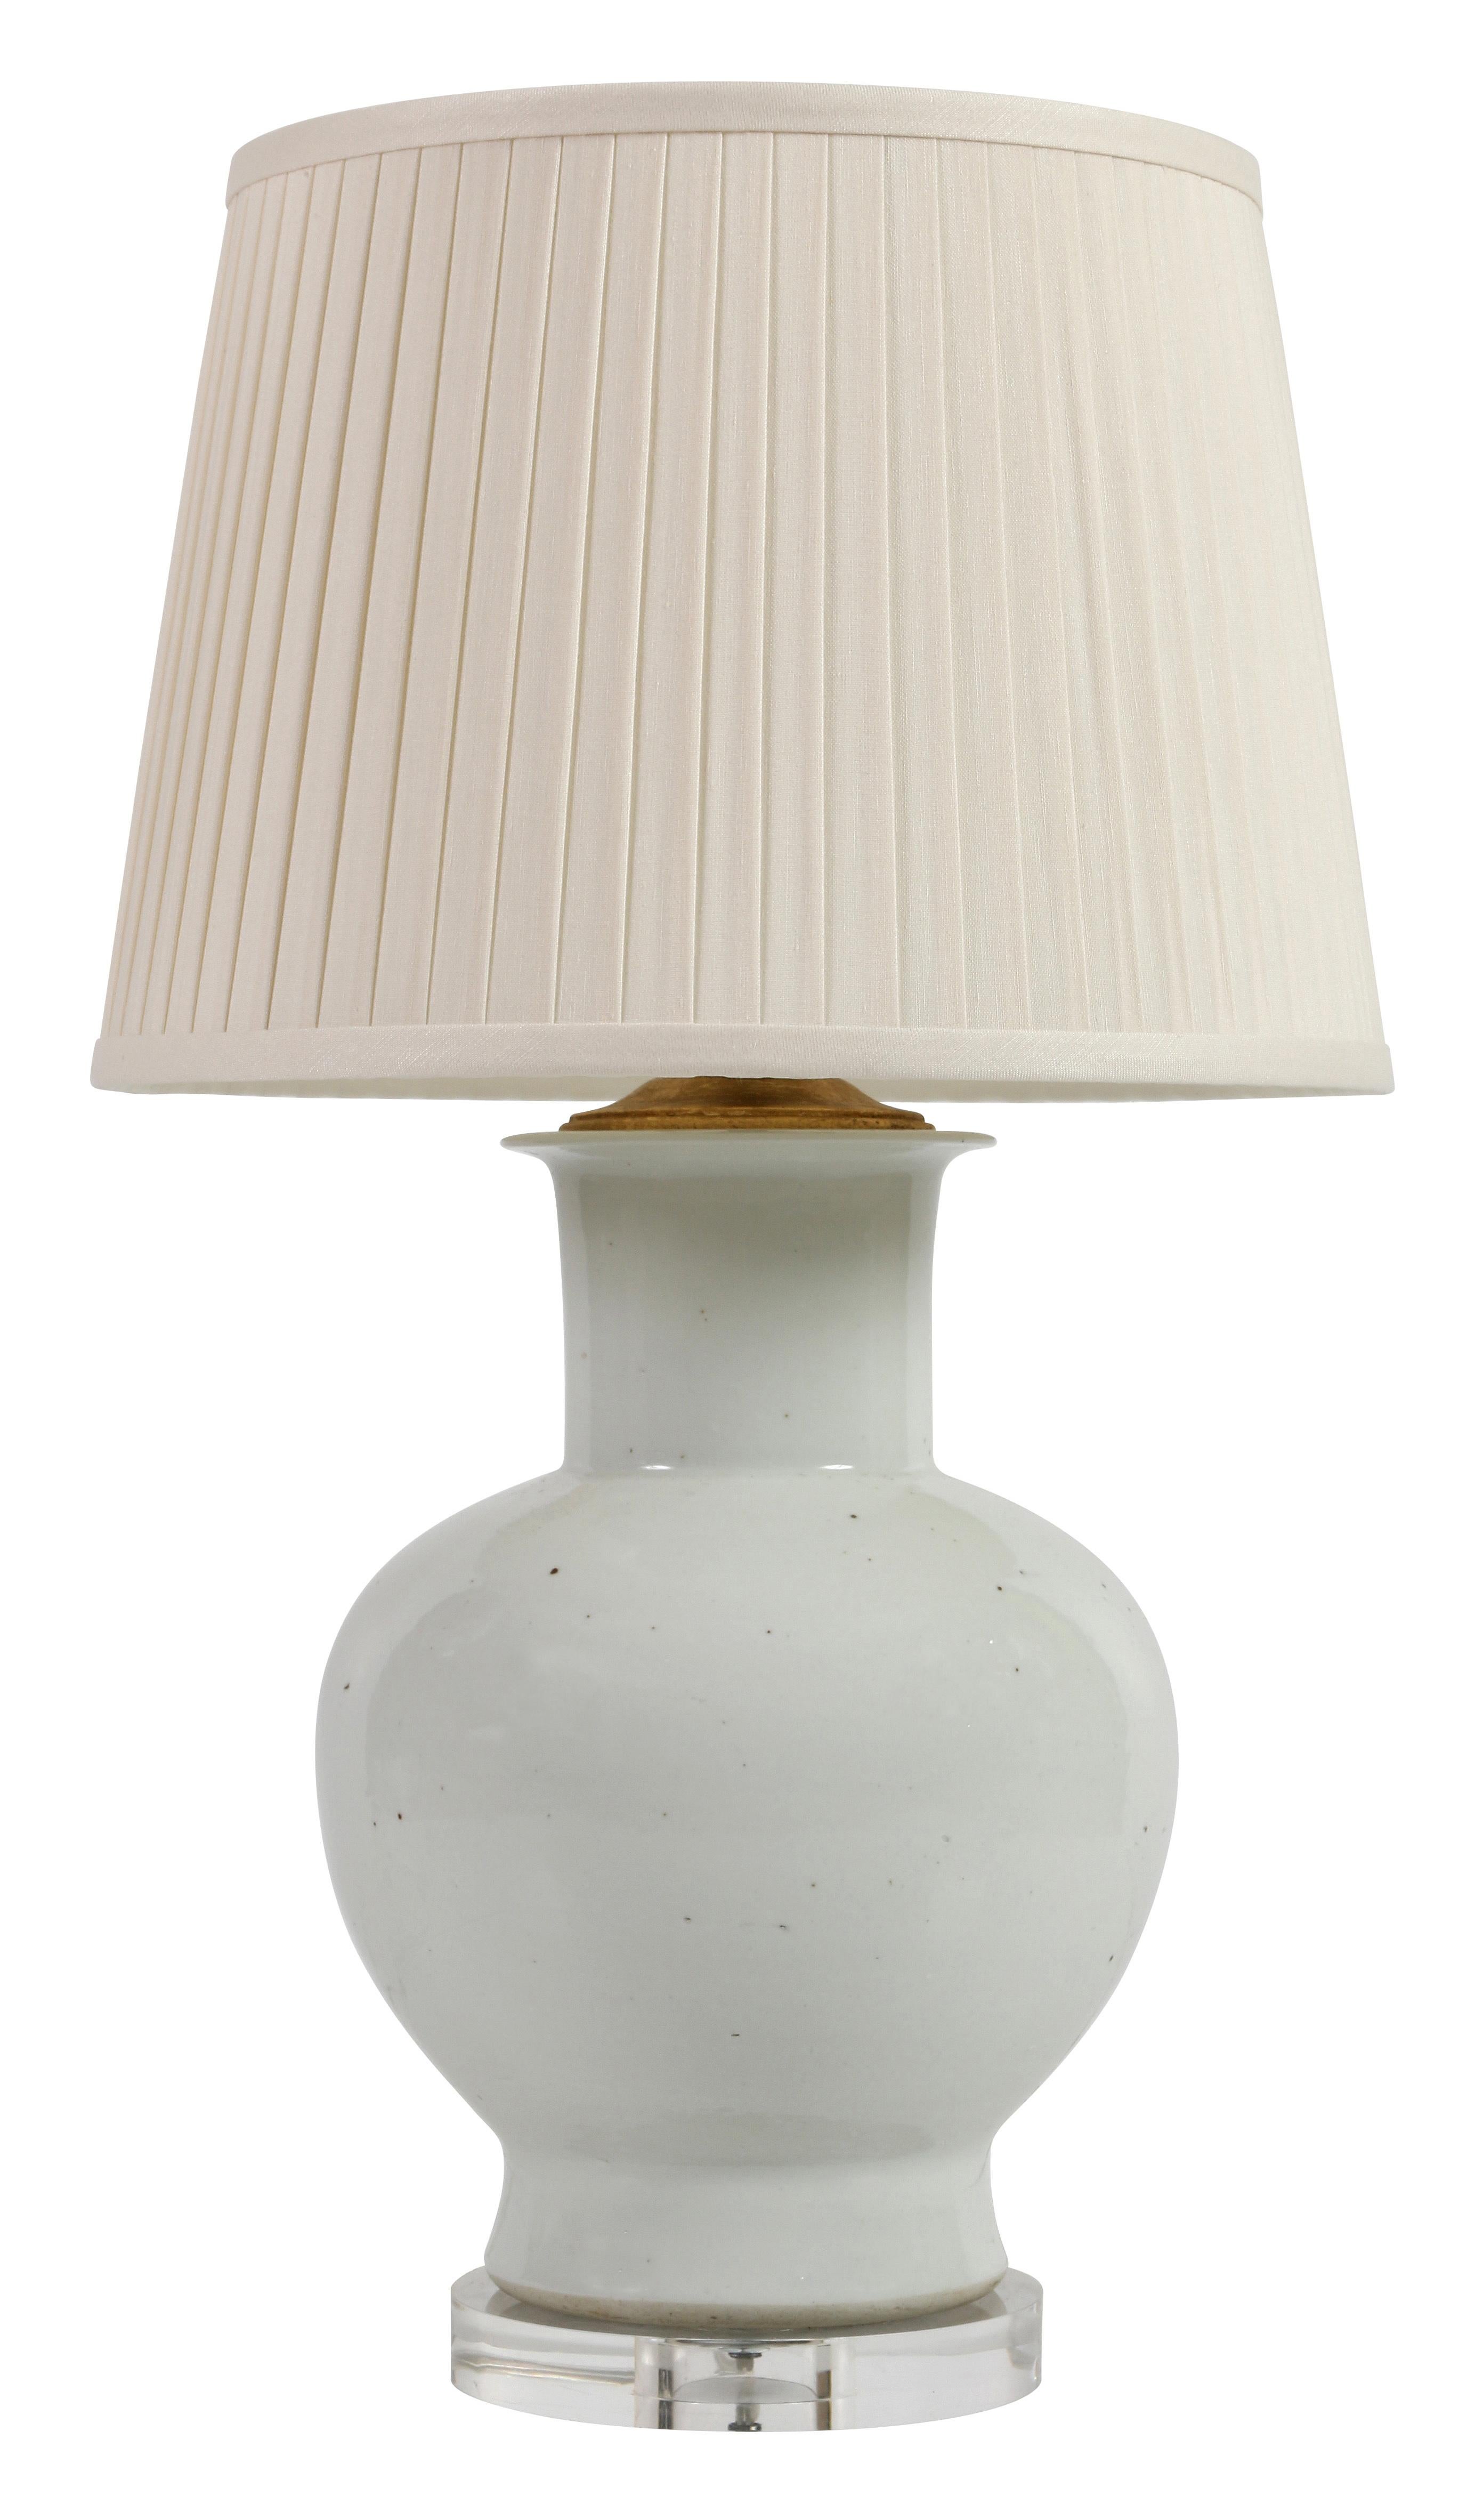 A pair of white ceramic urn-shaped lamps with brass fittings on a lucite base with a pleated linen drum shade. With their classic shape and neutral color, these lamps can go anywhere and can add a bit of freshness to a room.